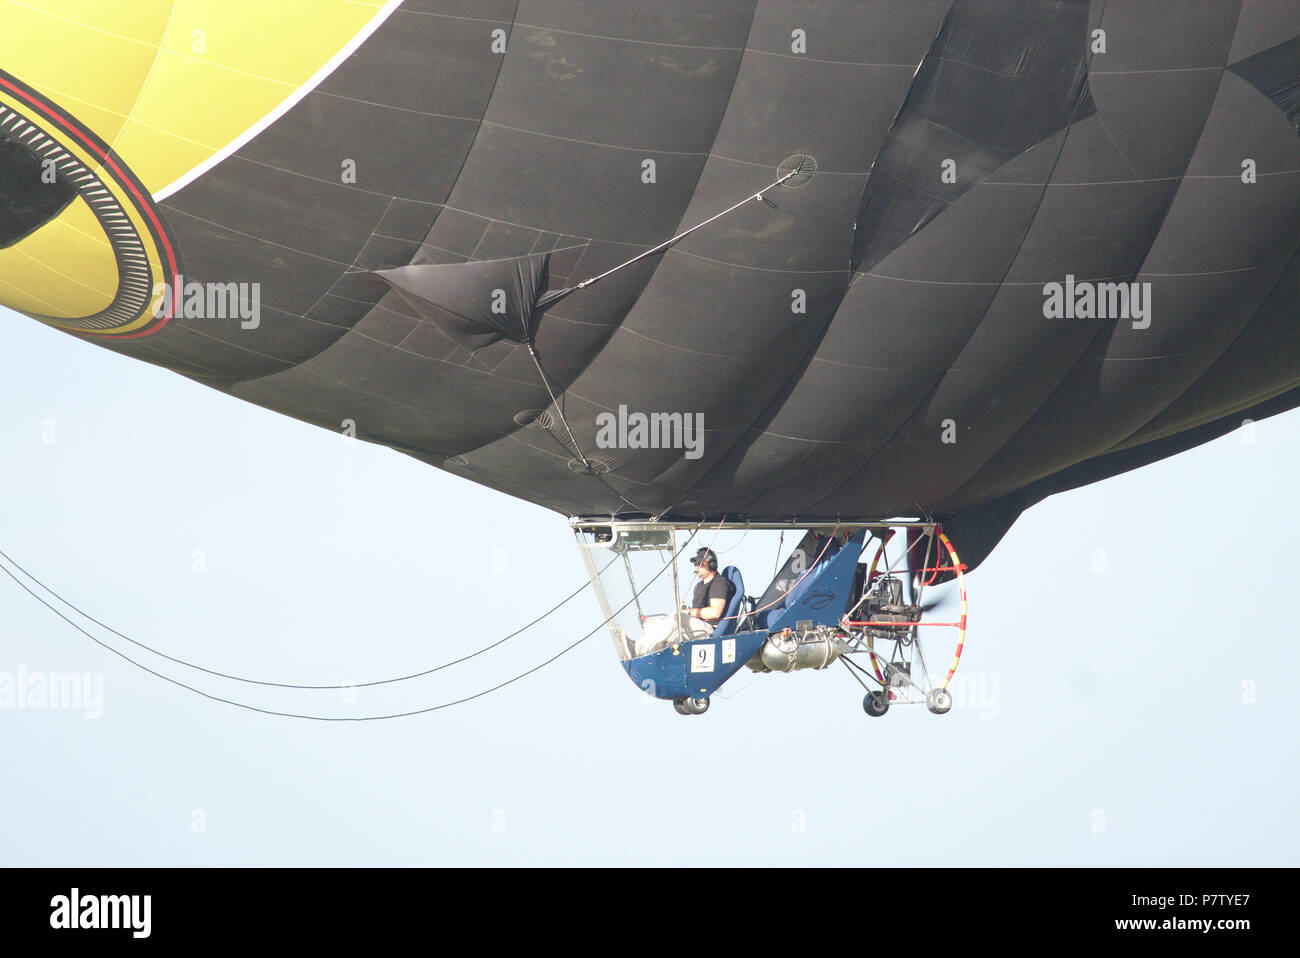 Wroclaw/Poland. 7th Jul, 2018. The last day of the Lower Silesia Balloon Cup: in a heavy wind competitors try to keep their ballons on track. Credit: Borys Szefczyk/Alamy Live News. Stock Photo